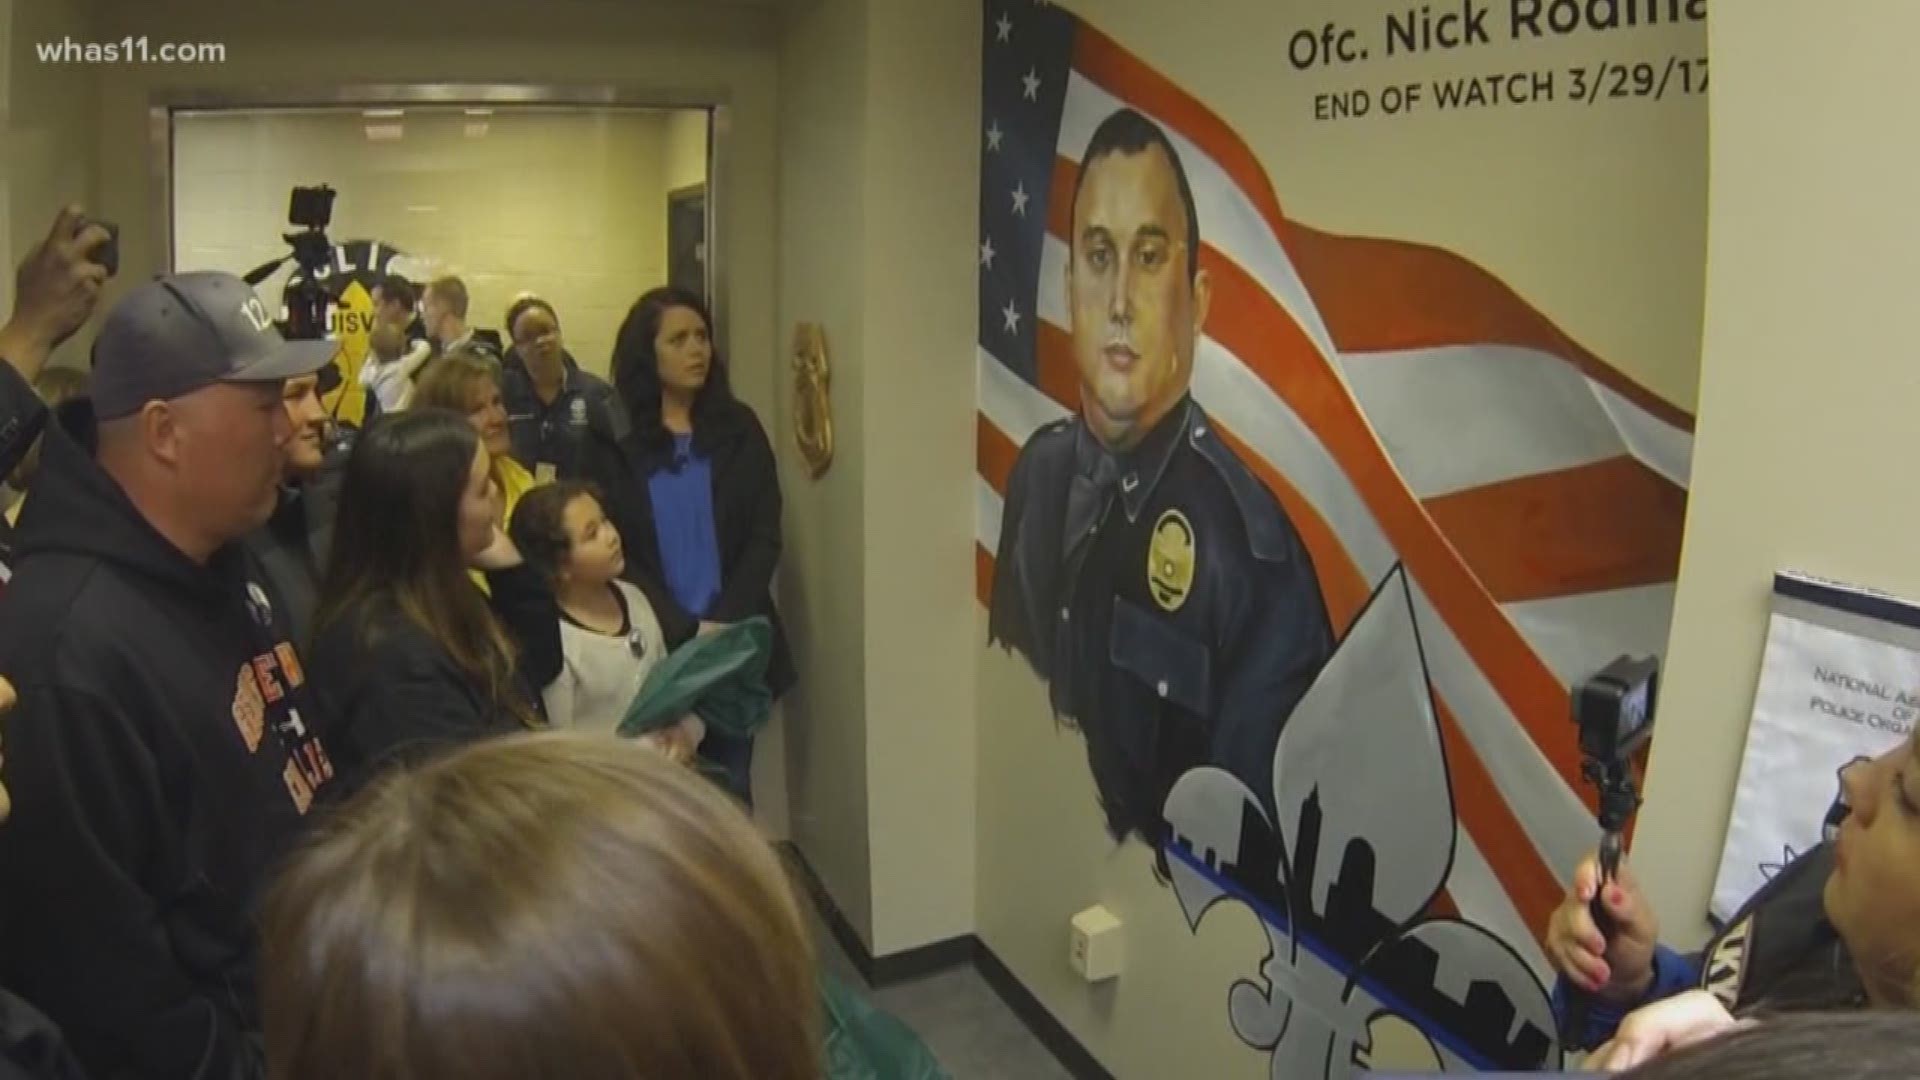 The city honored fallen Officer Nick Rodman with a street naming and mural.